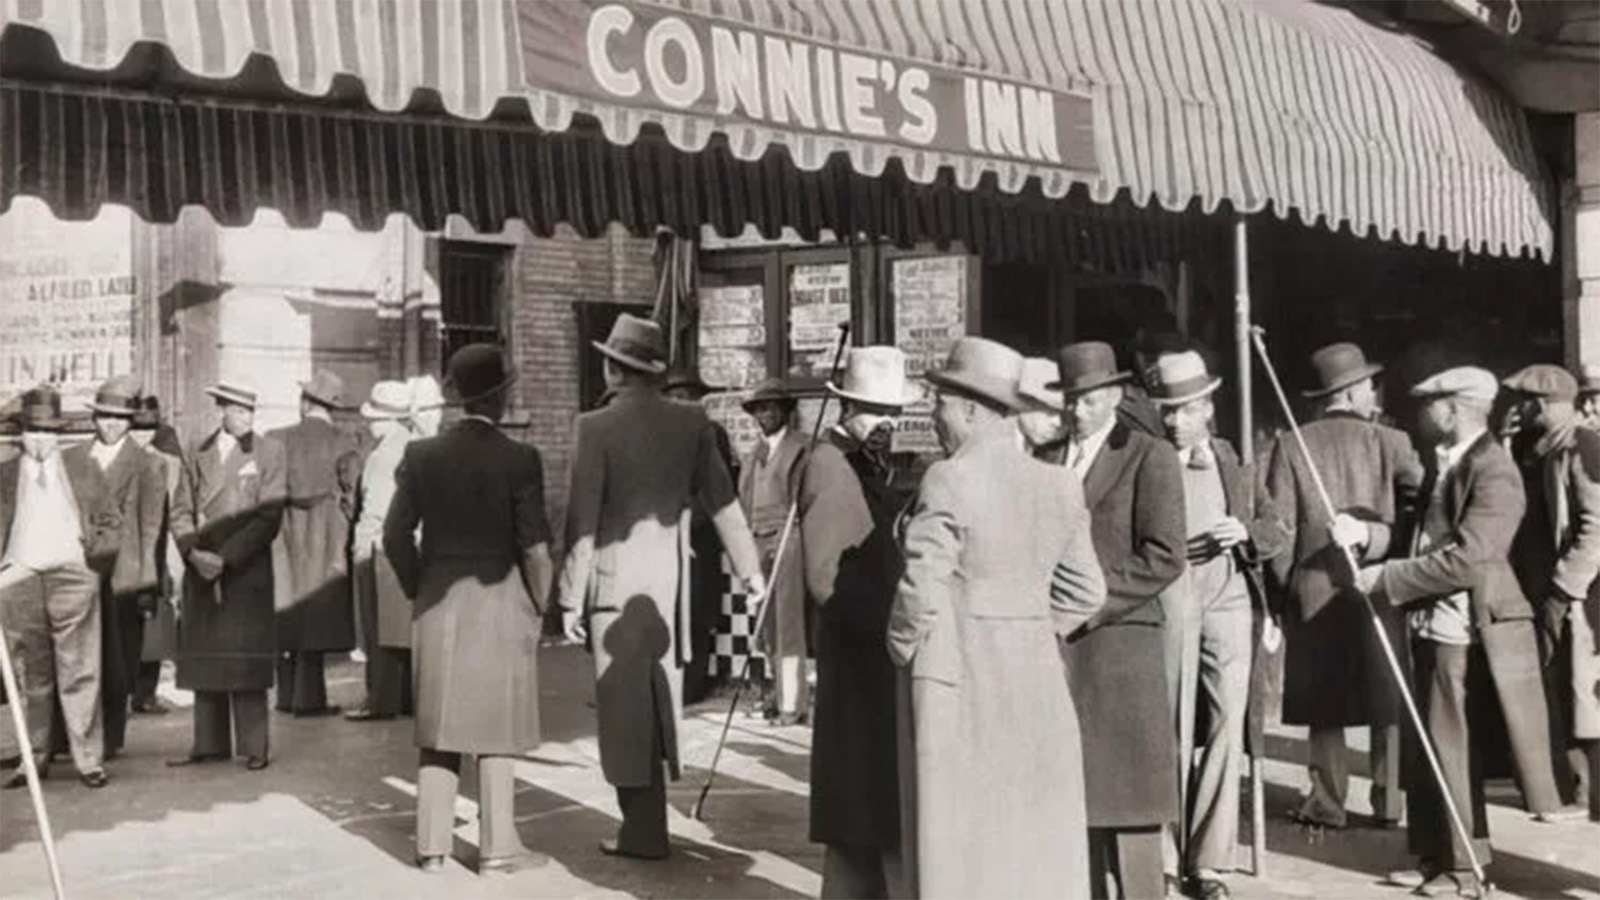 A black-and-white photo of a group of Black men in long dress coats, suits, and top hats waiting outside of a building on which the sign “Connie’s Inn” is displayed. 